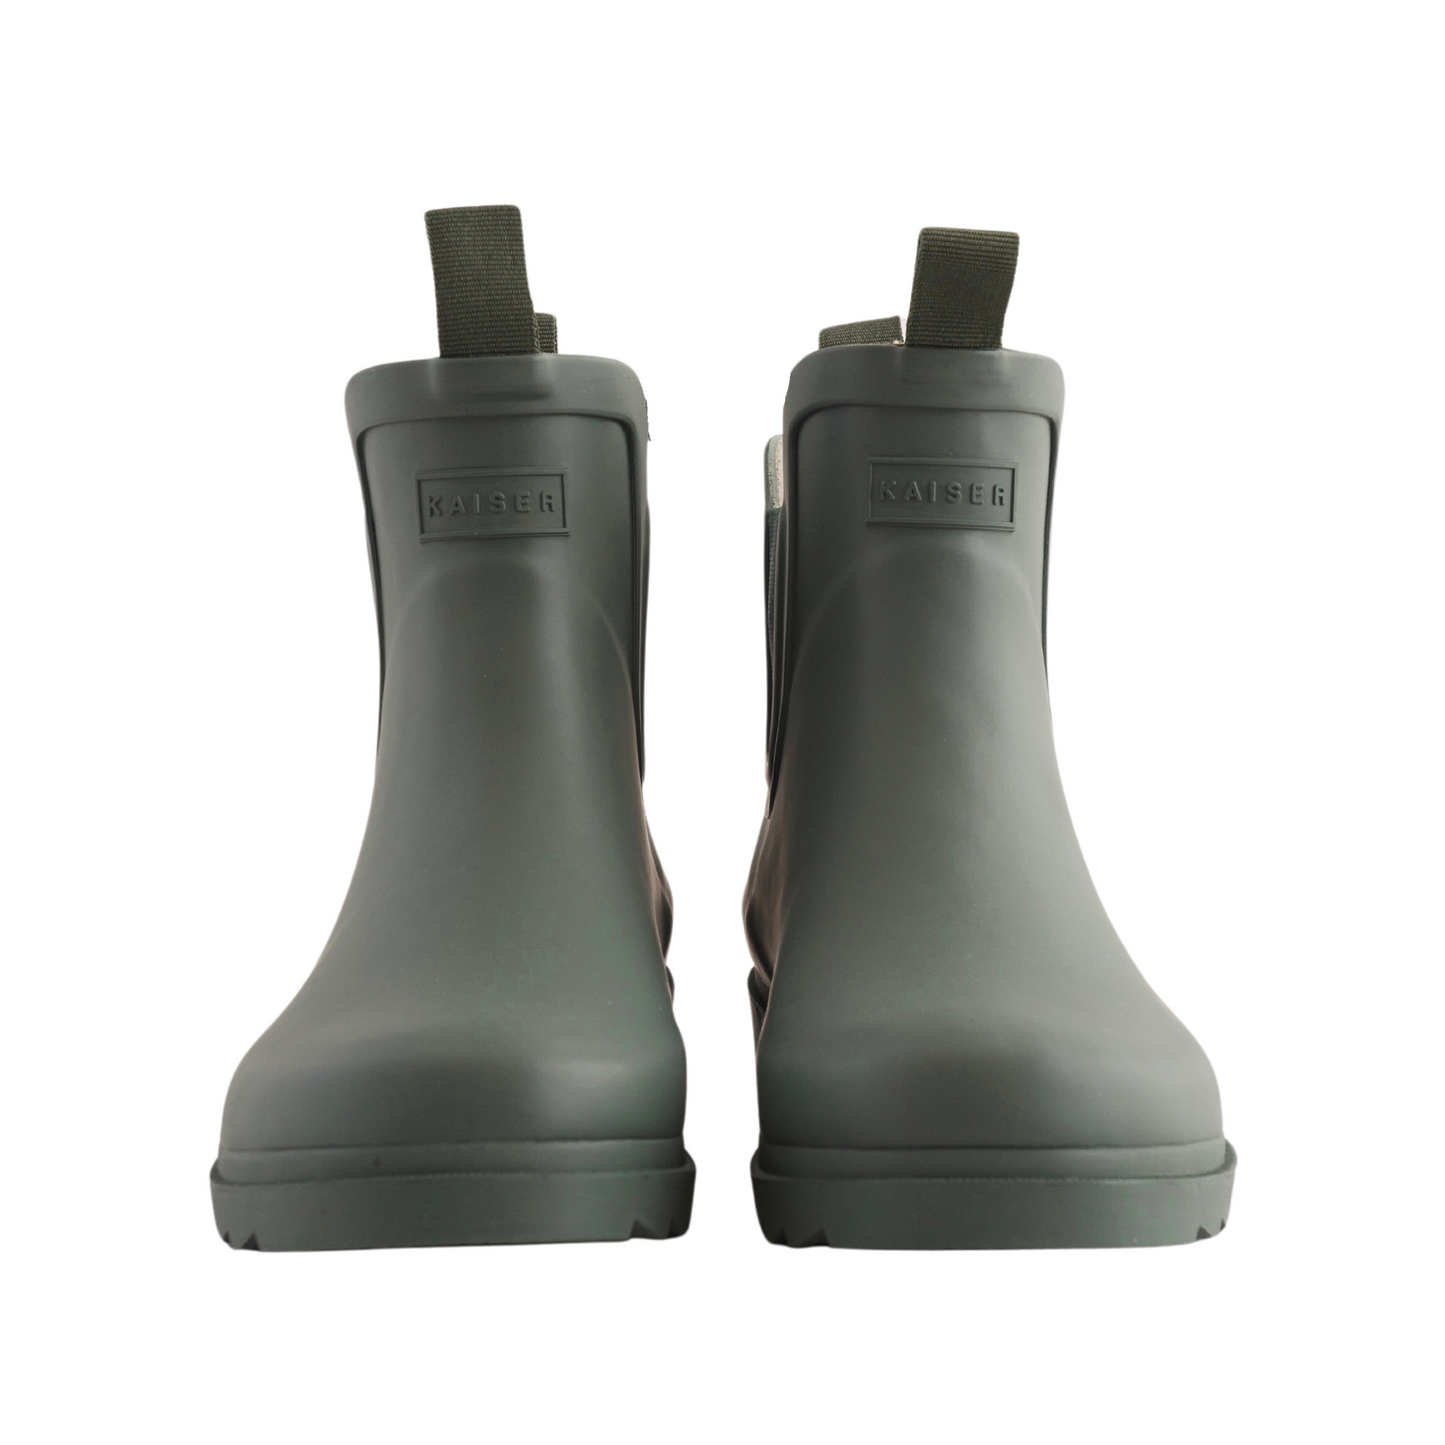 Ankle Gumboots - Green Size 7